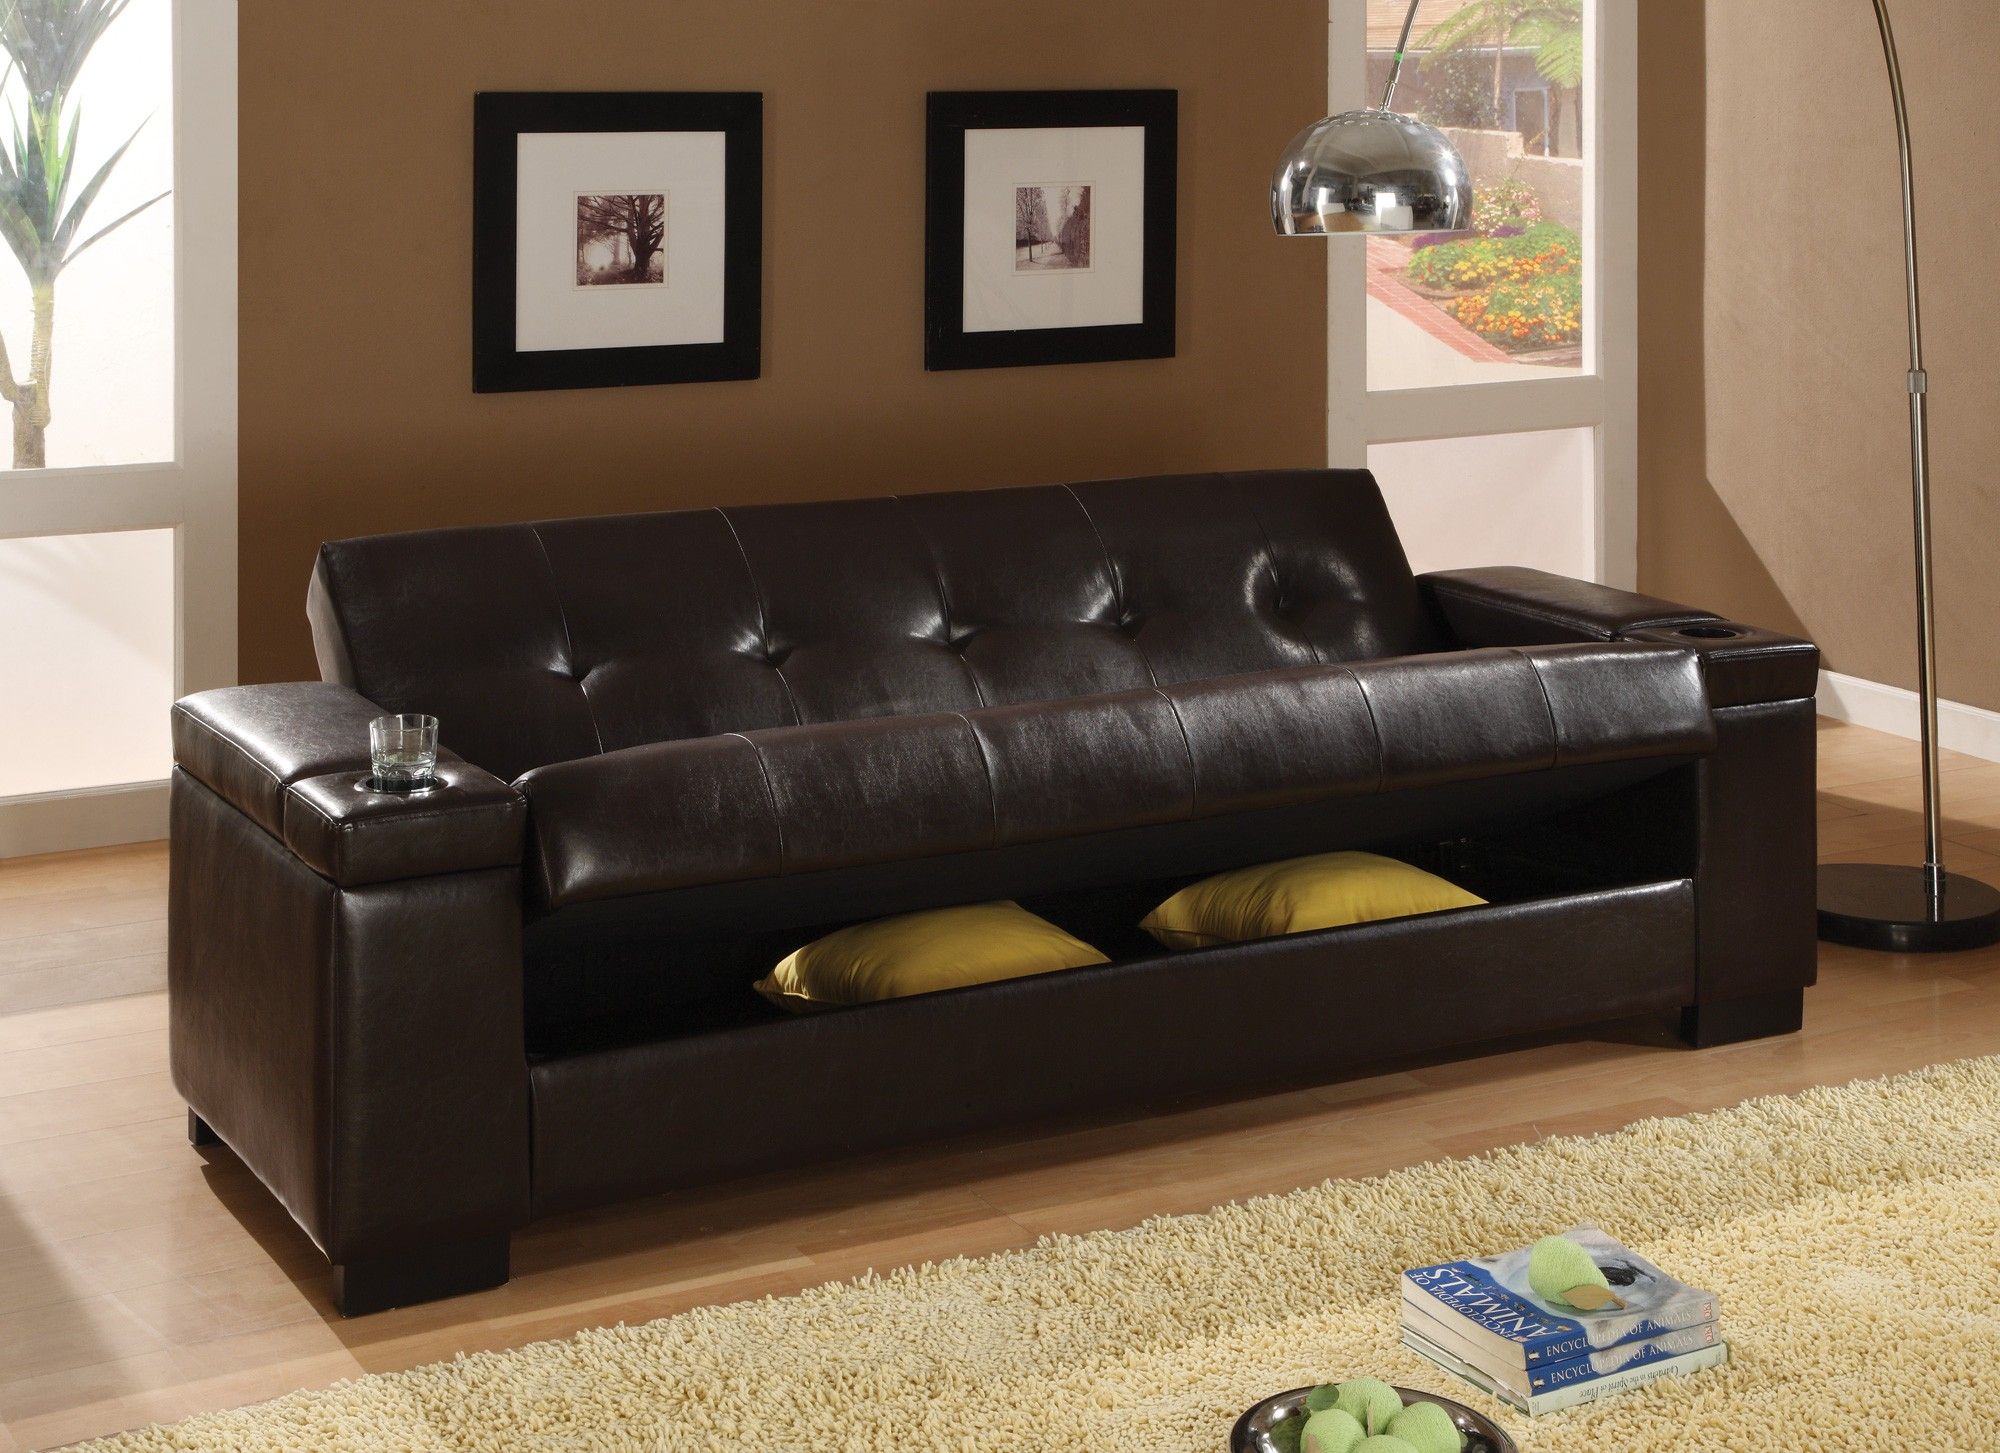 Faux Leather Convertible Sofa Sleeper With Storage 300143 From Coaster Intended For 8 Seat Convertible Sofas (Gallery 8 of 20)